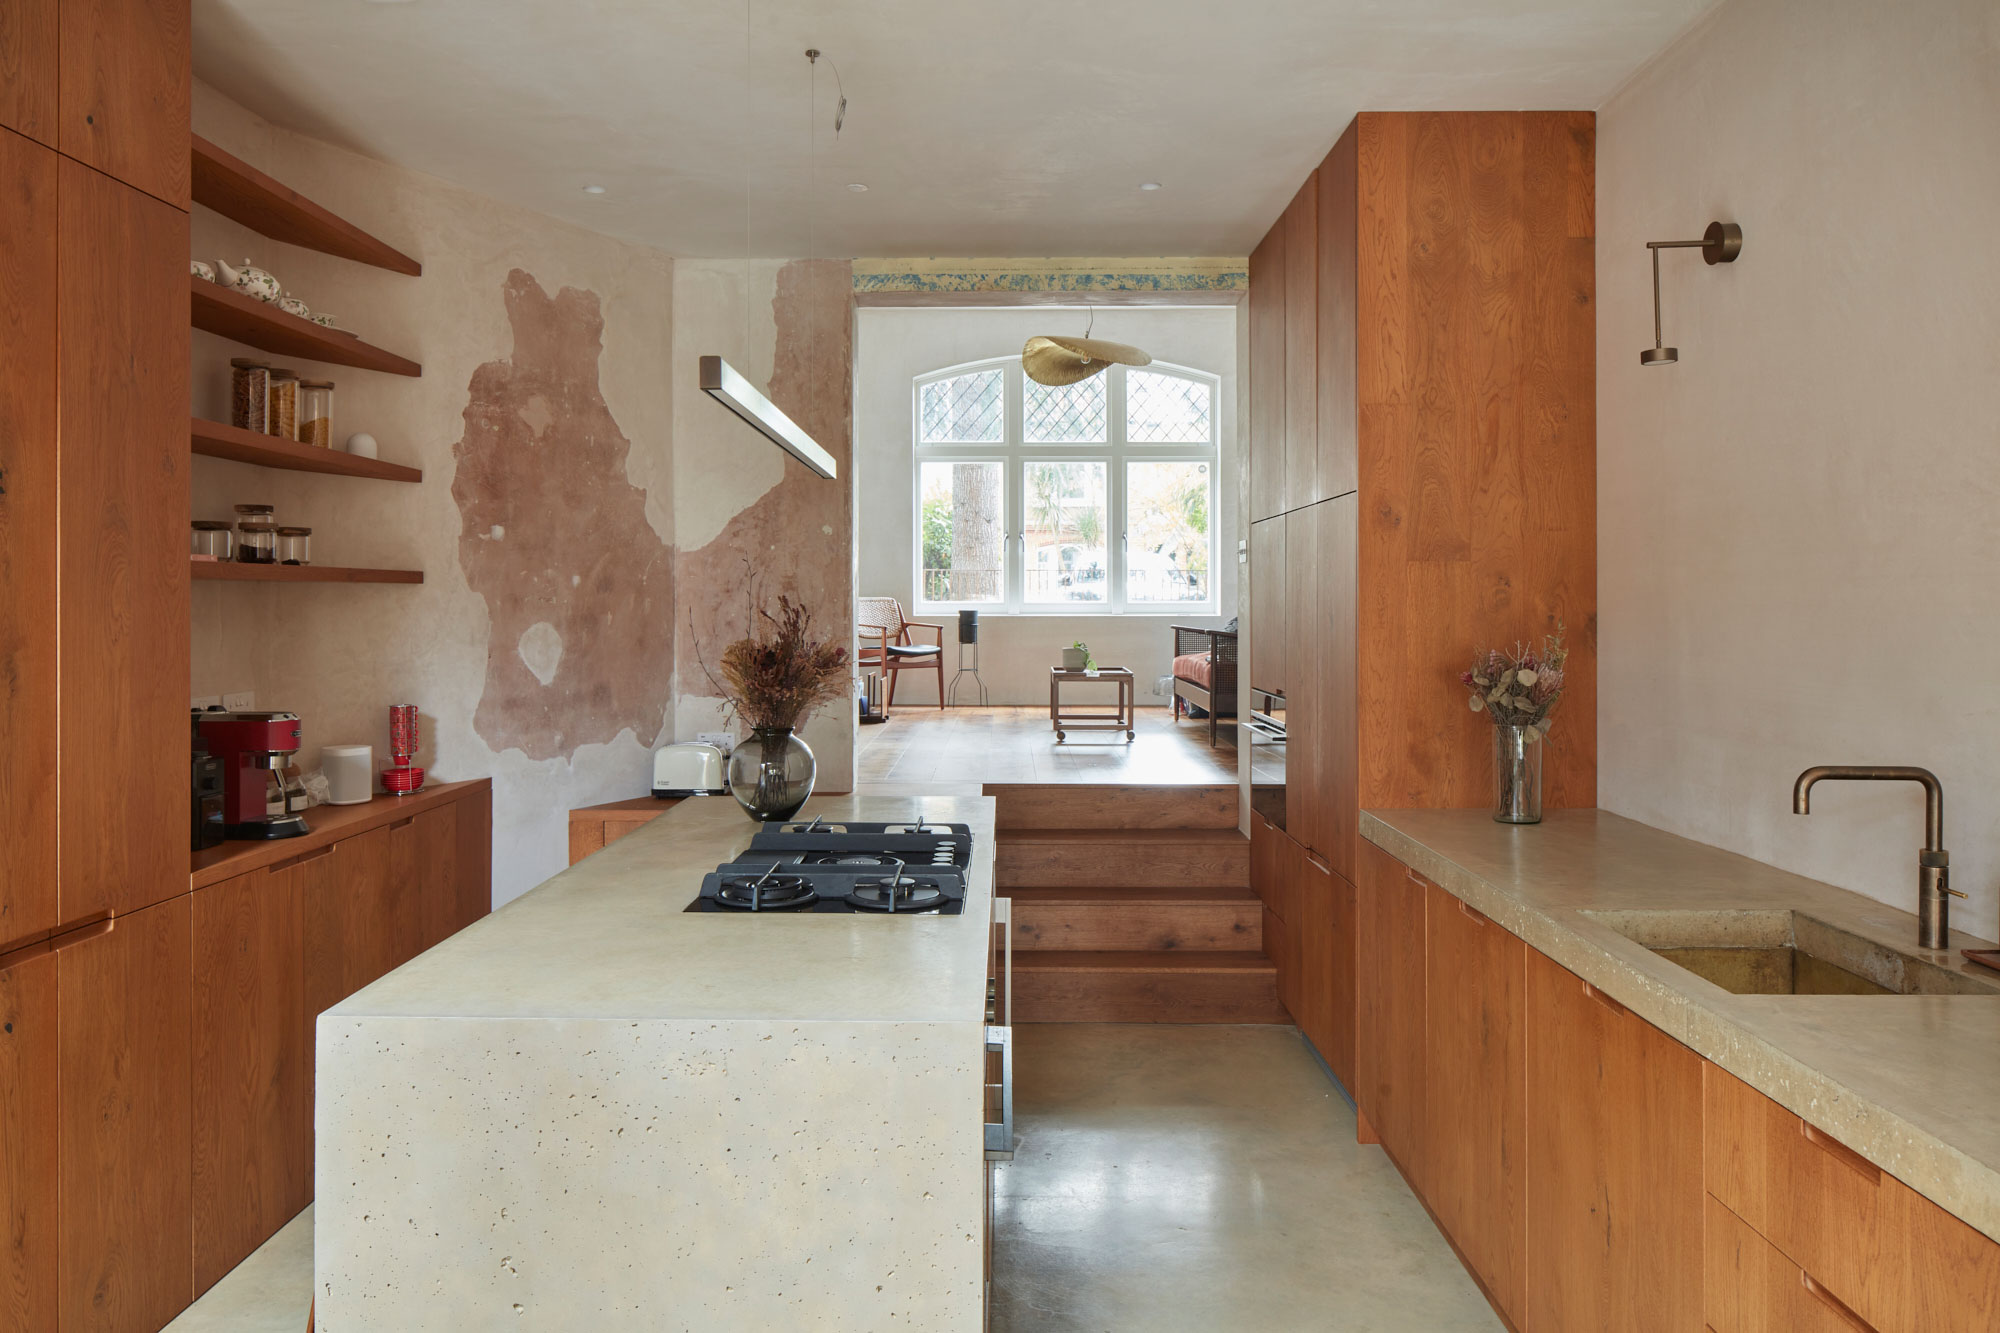 Modern kitchen design with concrete worktops and oak cabinetry